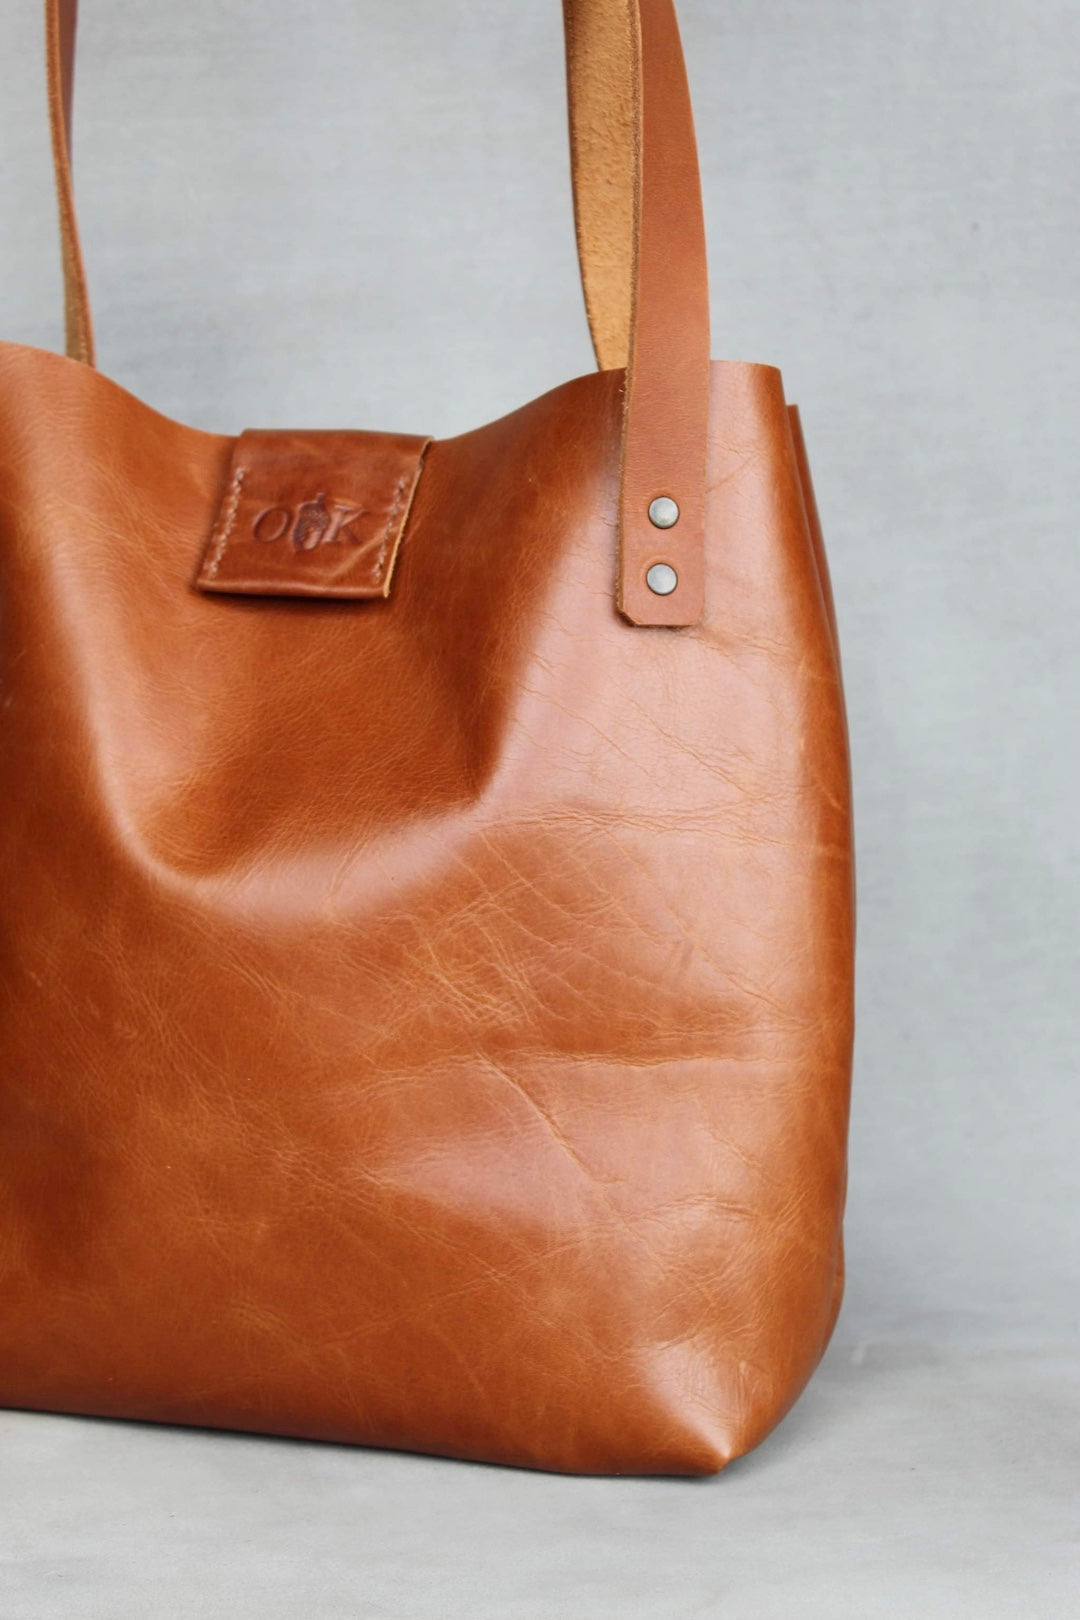 soft leather tote handbag in amber